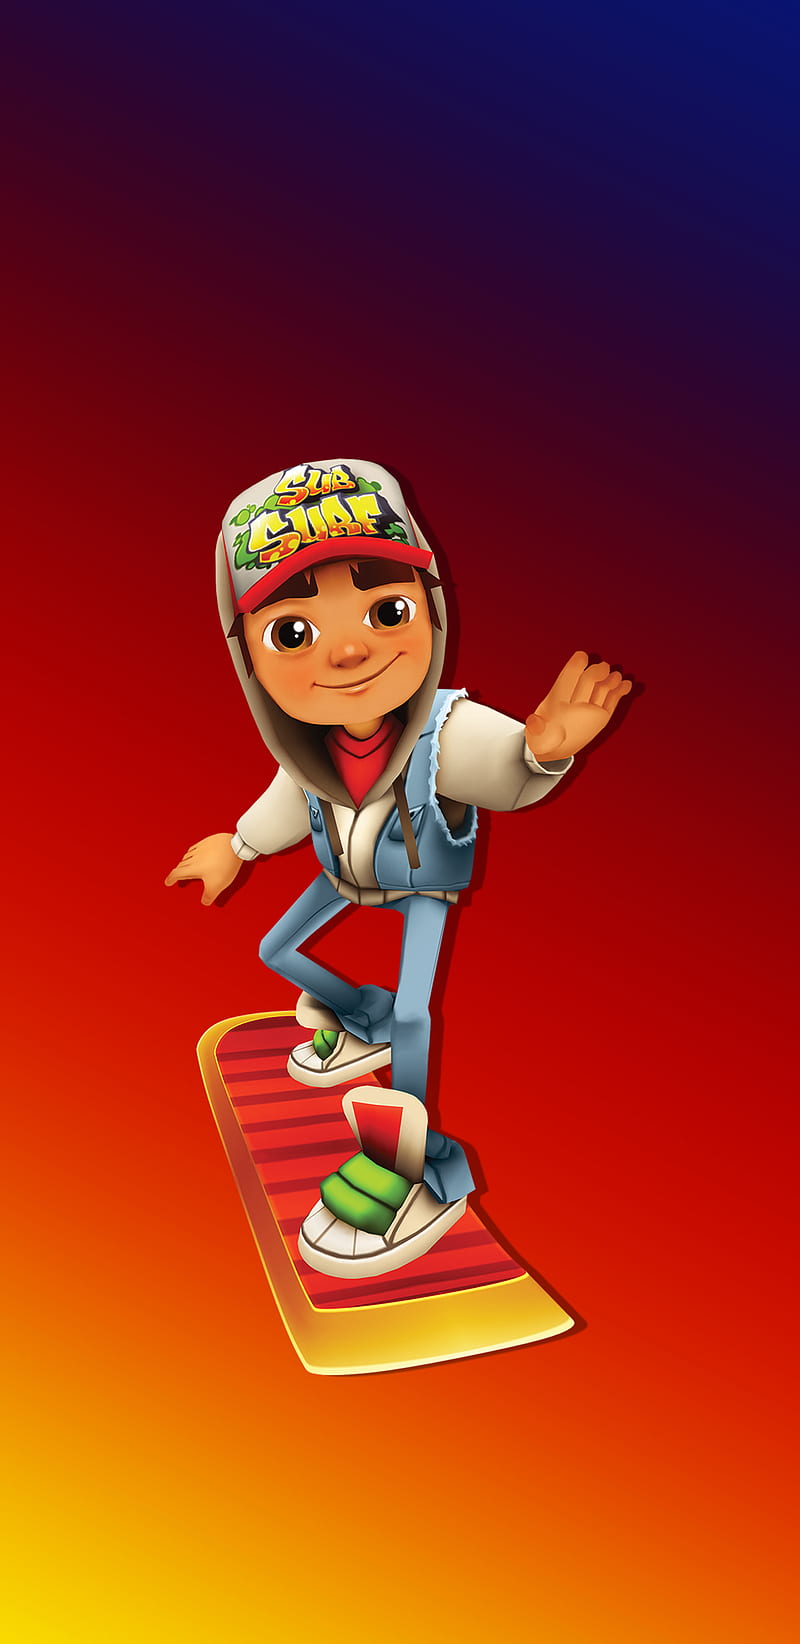 Subway Surfers wallpaper by INDtanay  Download on ZEDGE  fb82